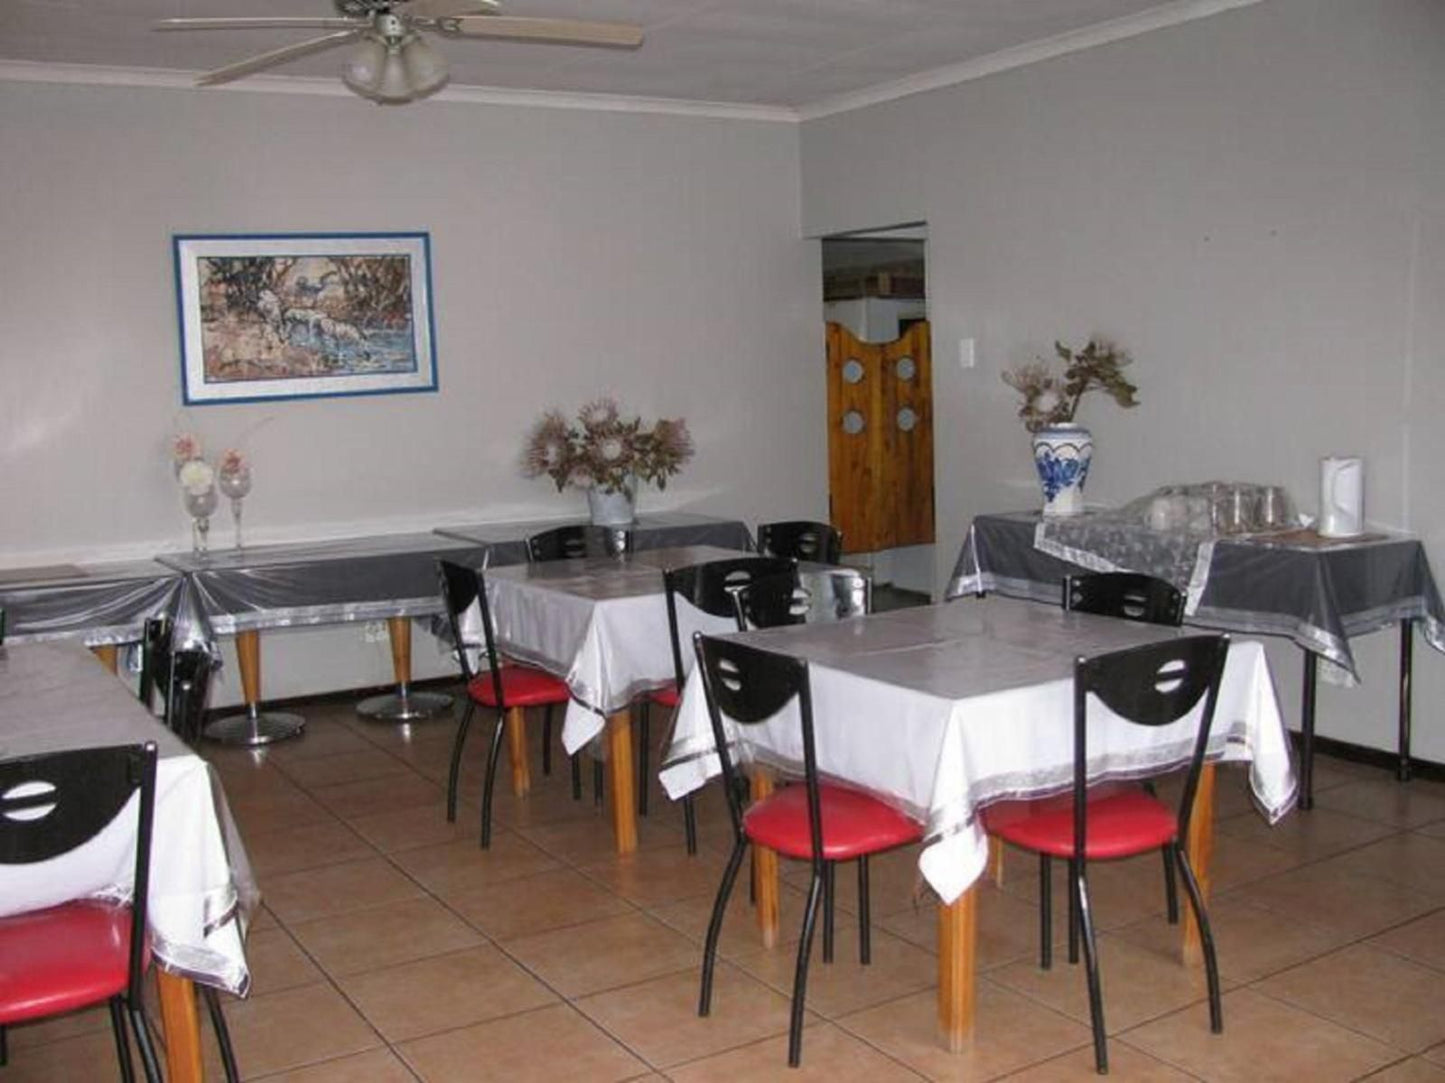 Kremetart Guesthouse Giyani Limpopo Province South Africa Place Cover, Food